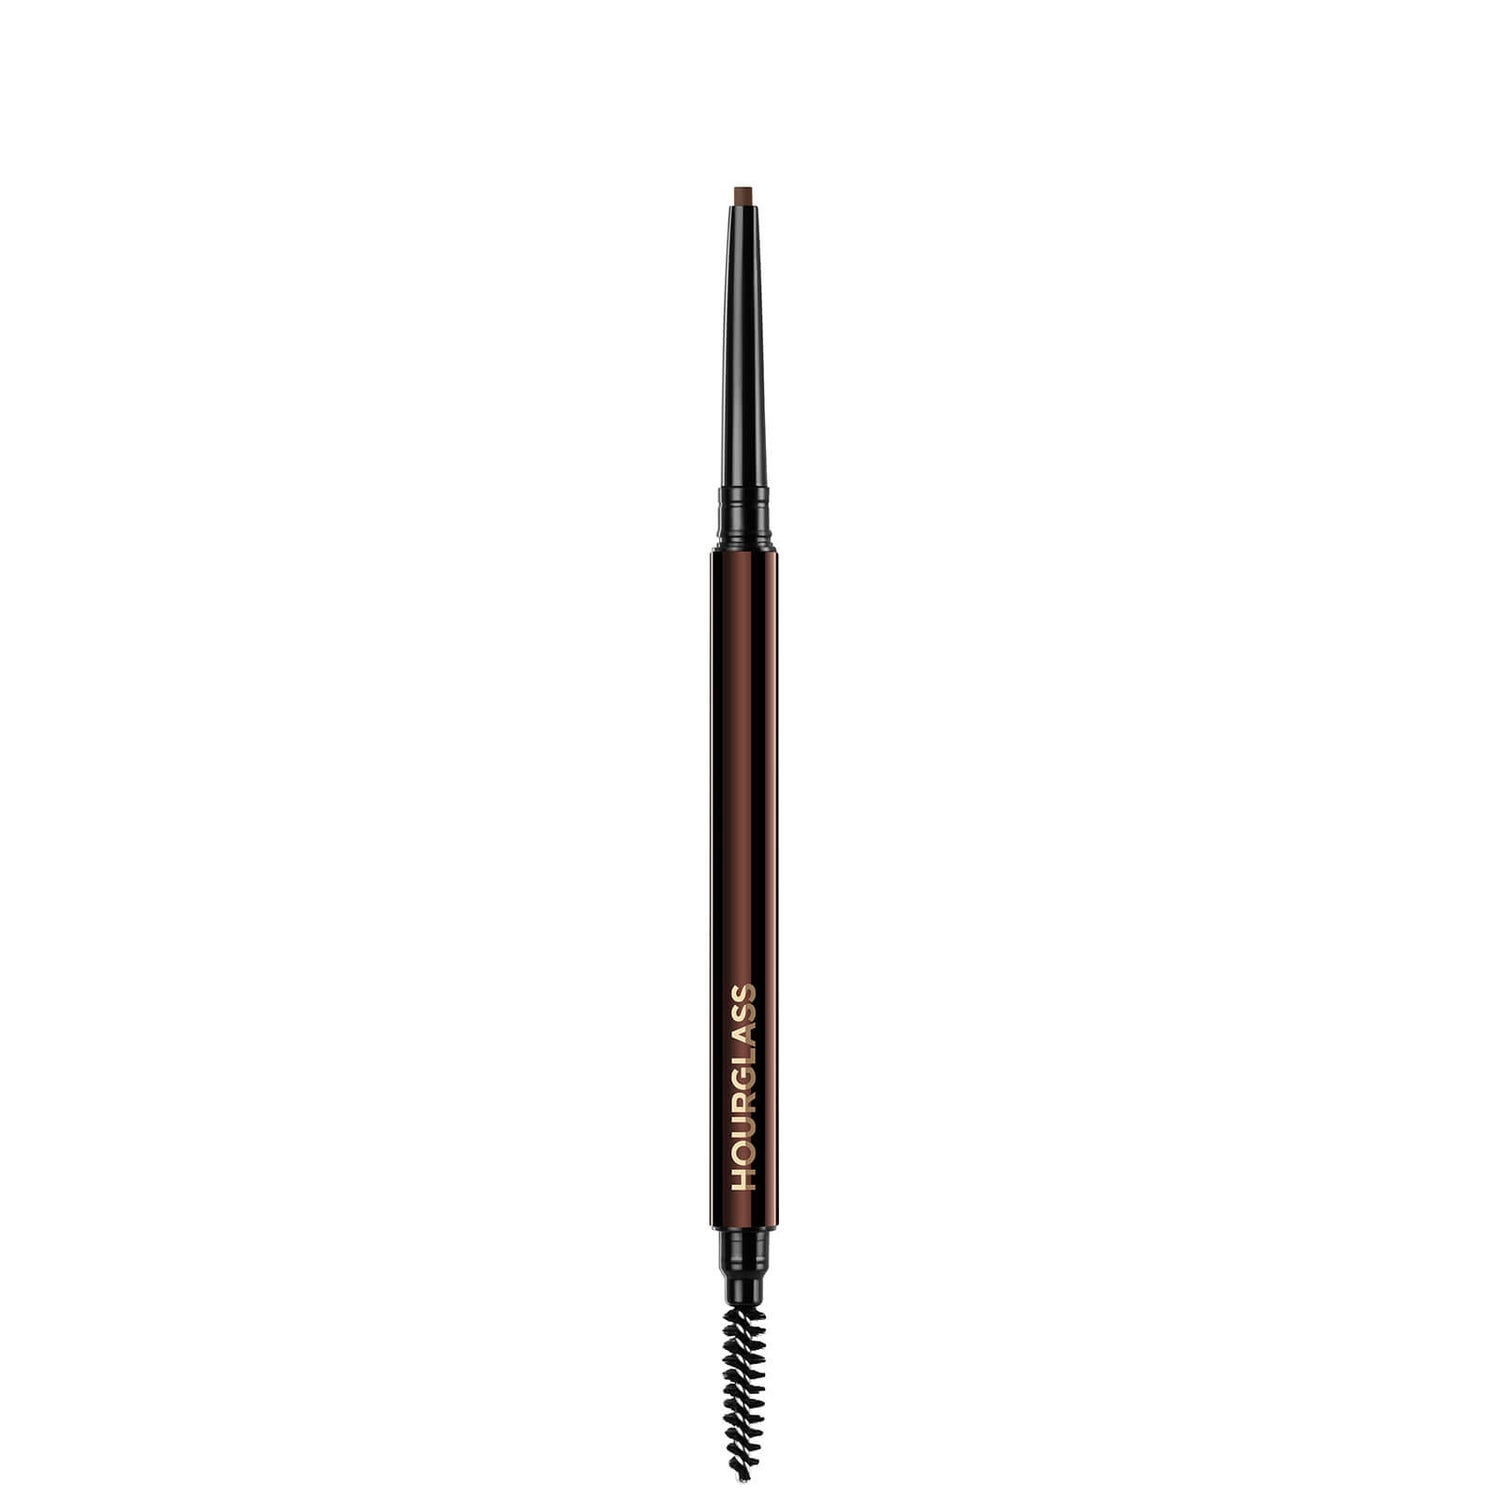 Hourglass Arch Brow Micro Sculpting Pencil 0.04g (Various Shades)